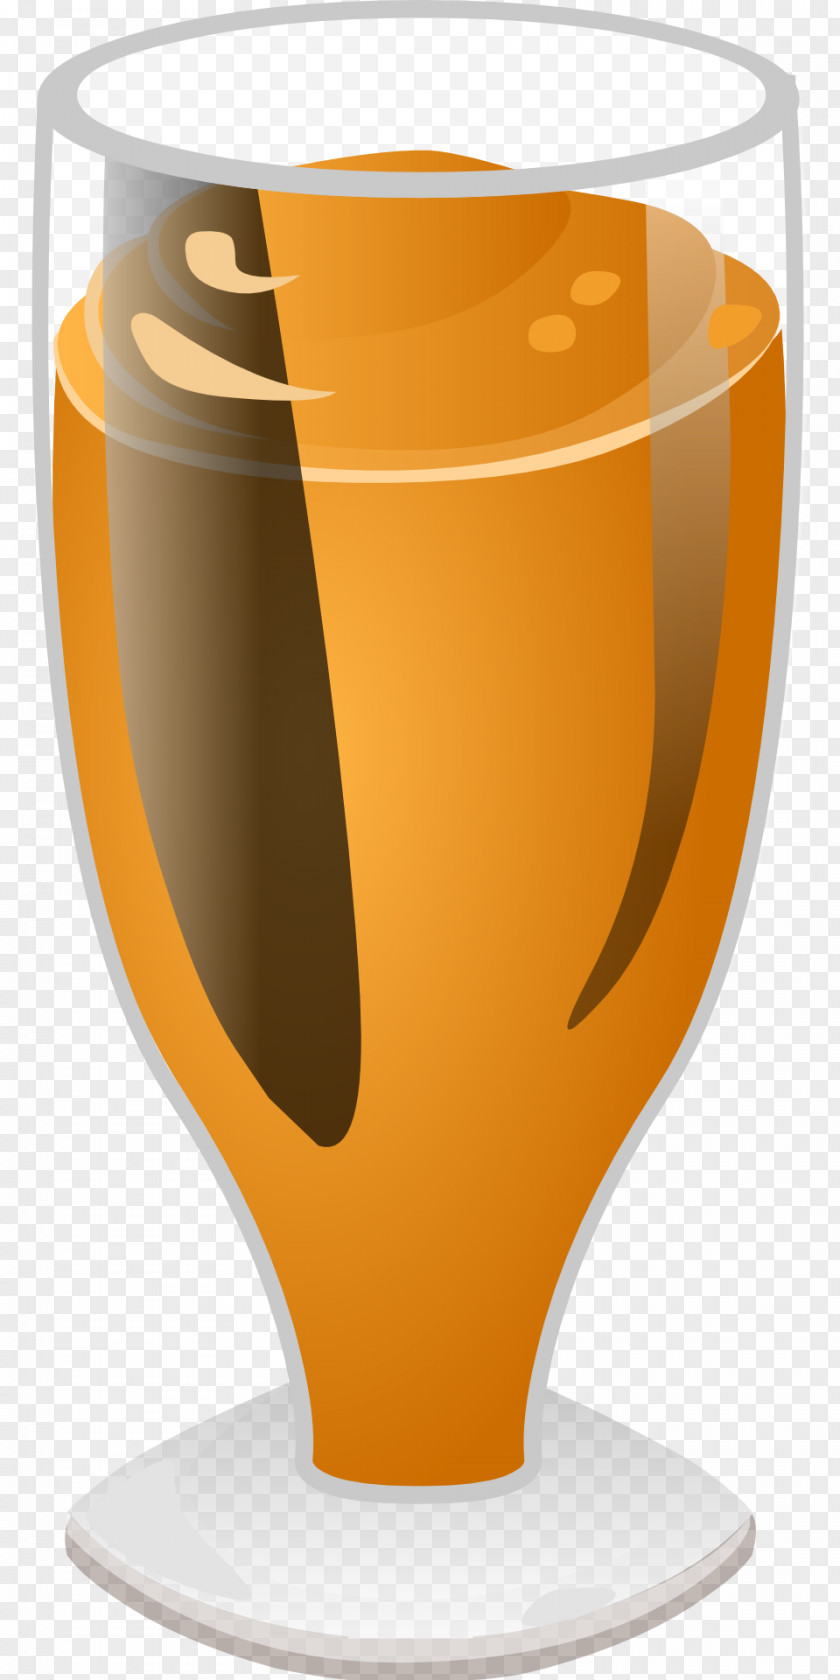 Orange Juice And The Transparent Cup Drink PNG